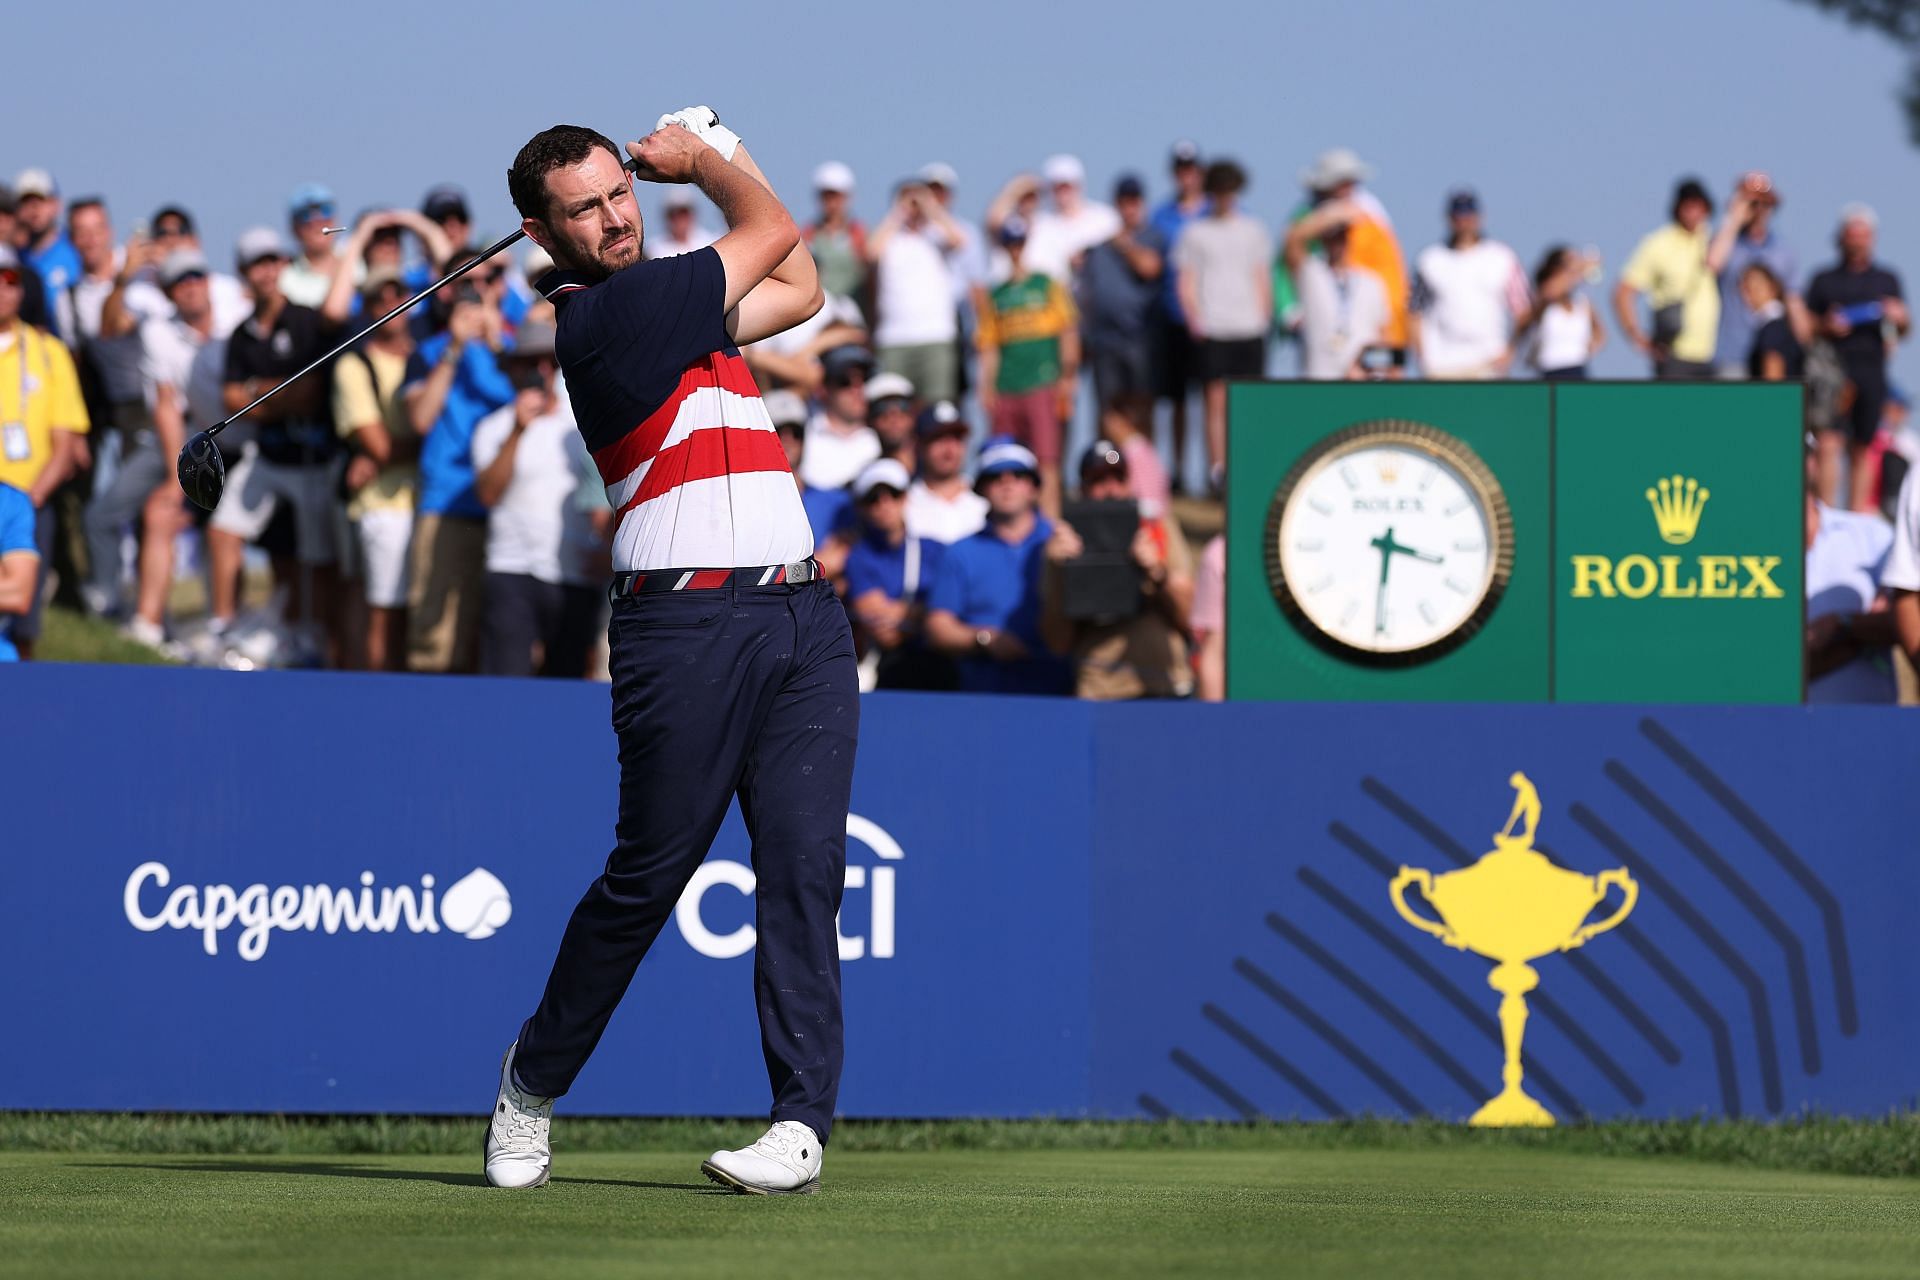 Patrick Cantlay was accused of going too slowly